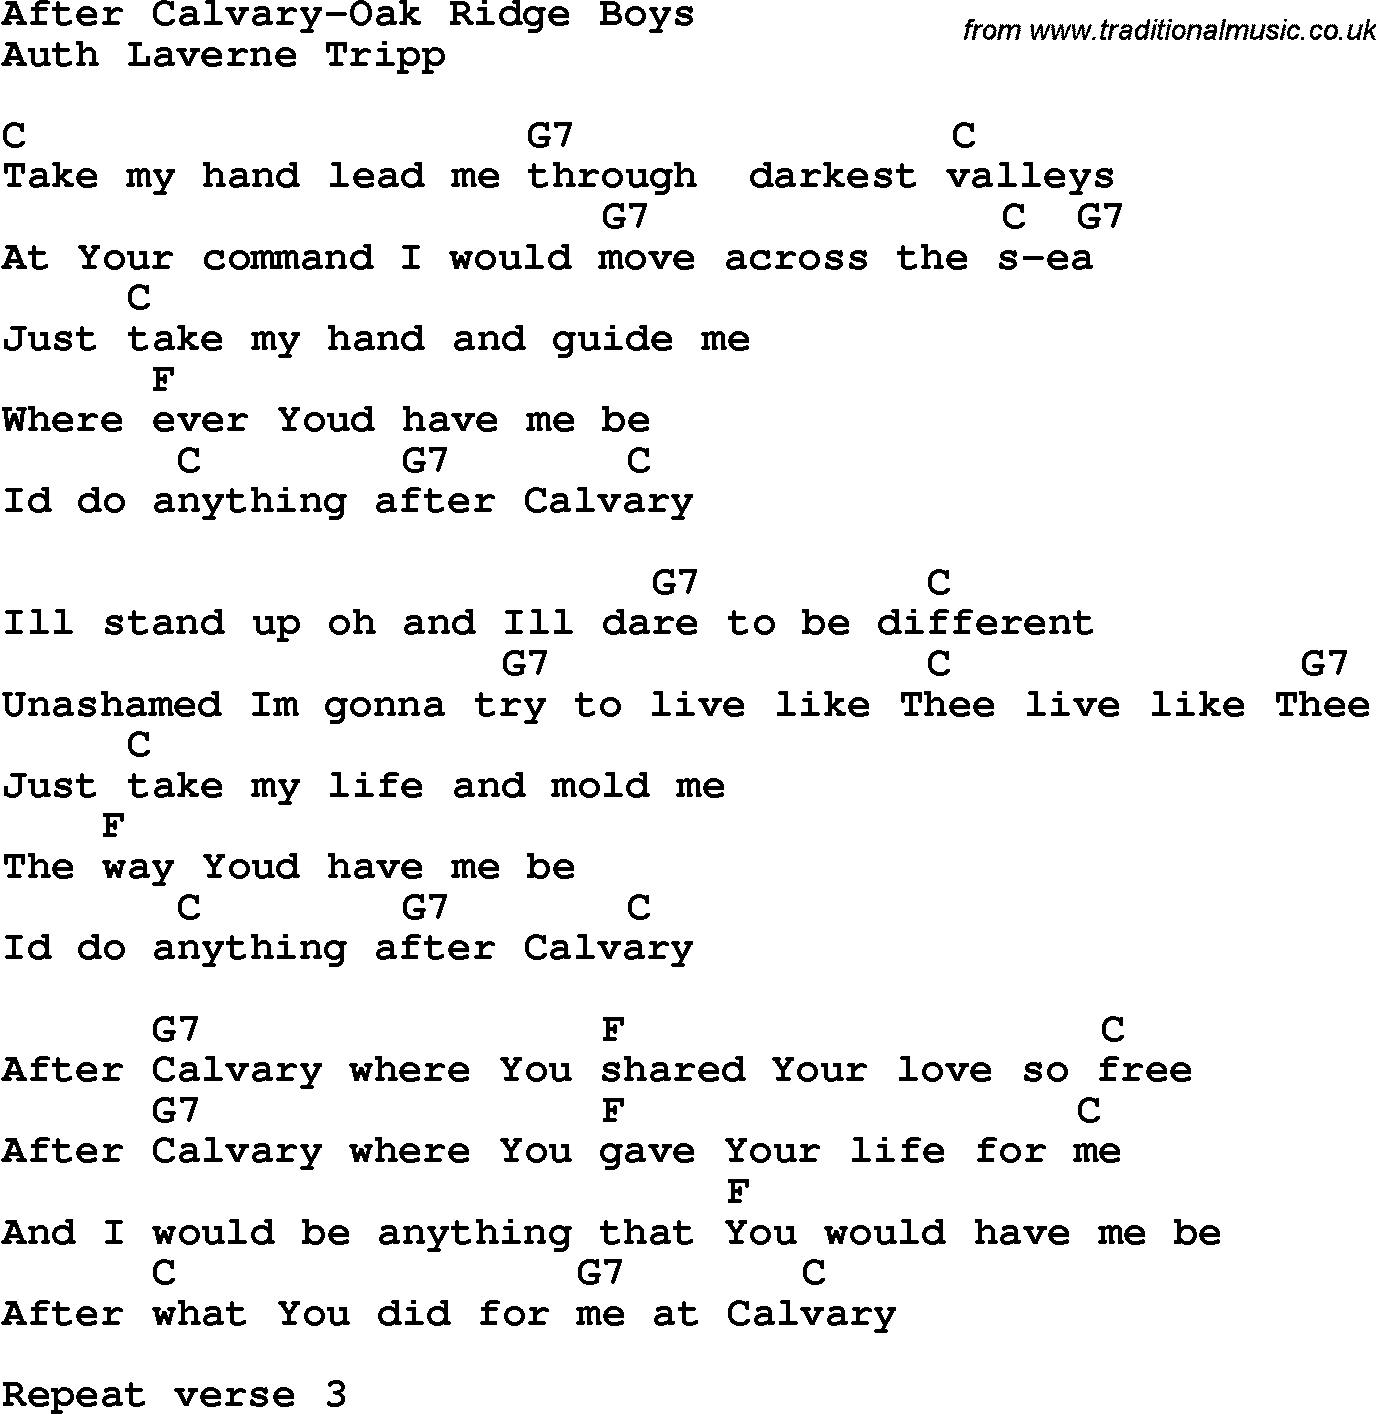 Country, Southern and Bluegrass Gospel Song After Calvary-Oak Ridge Boys lyrics and chords